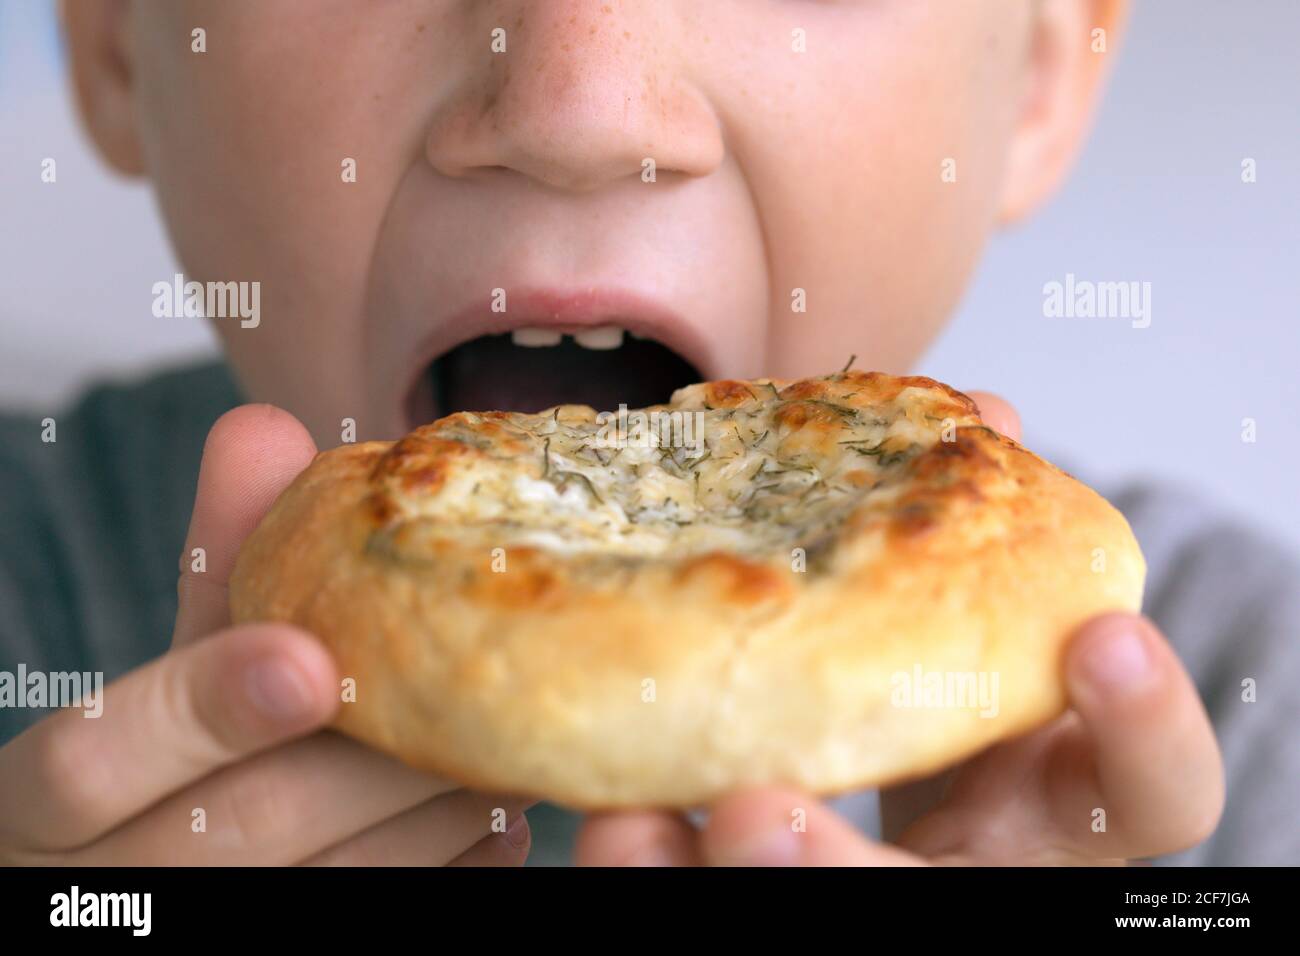 Close up view of boy eating donut. Kid eating unhealthy fast food. Problem is childhood obesity Stock Photo